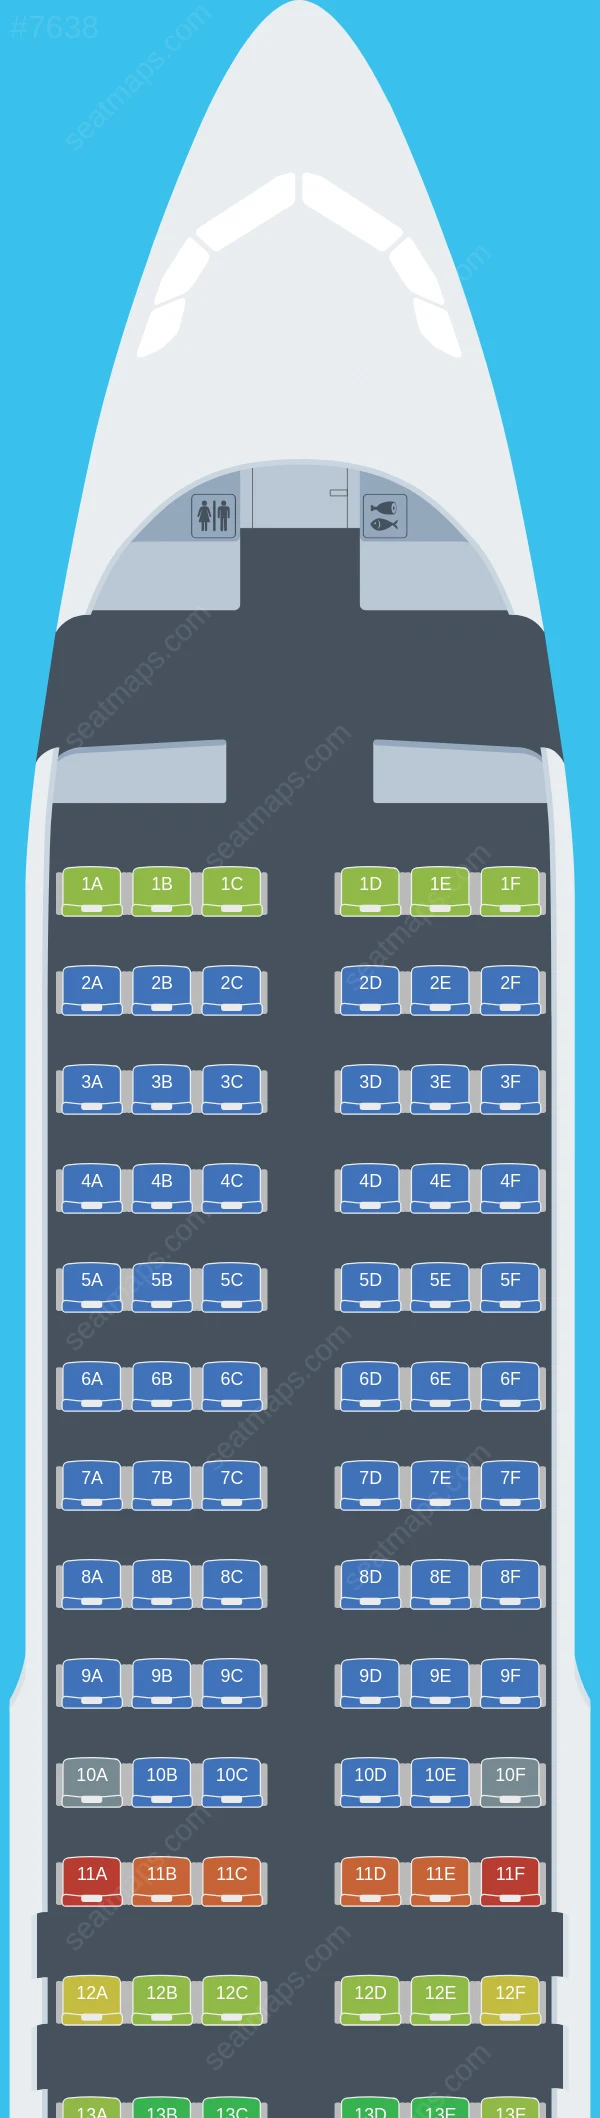 Himalaya Airlines Airbus A320-200 seatmap preview